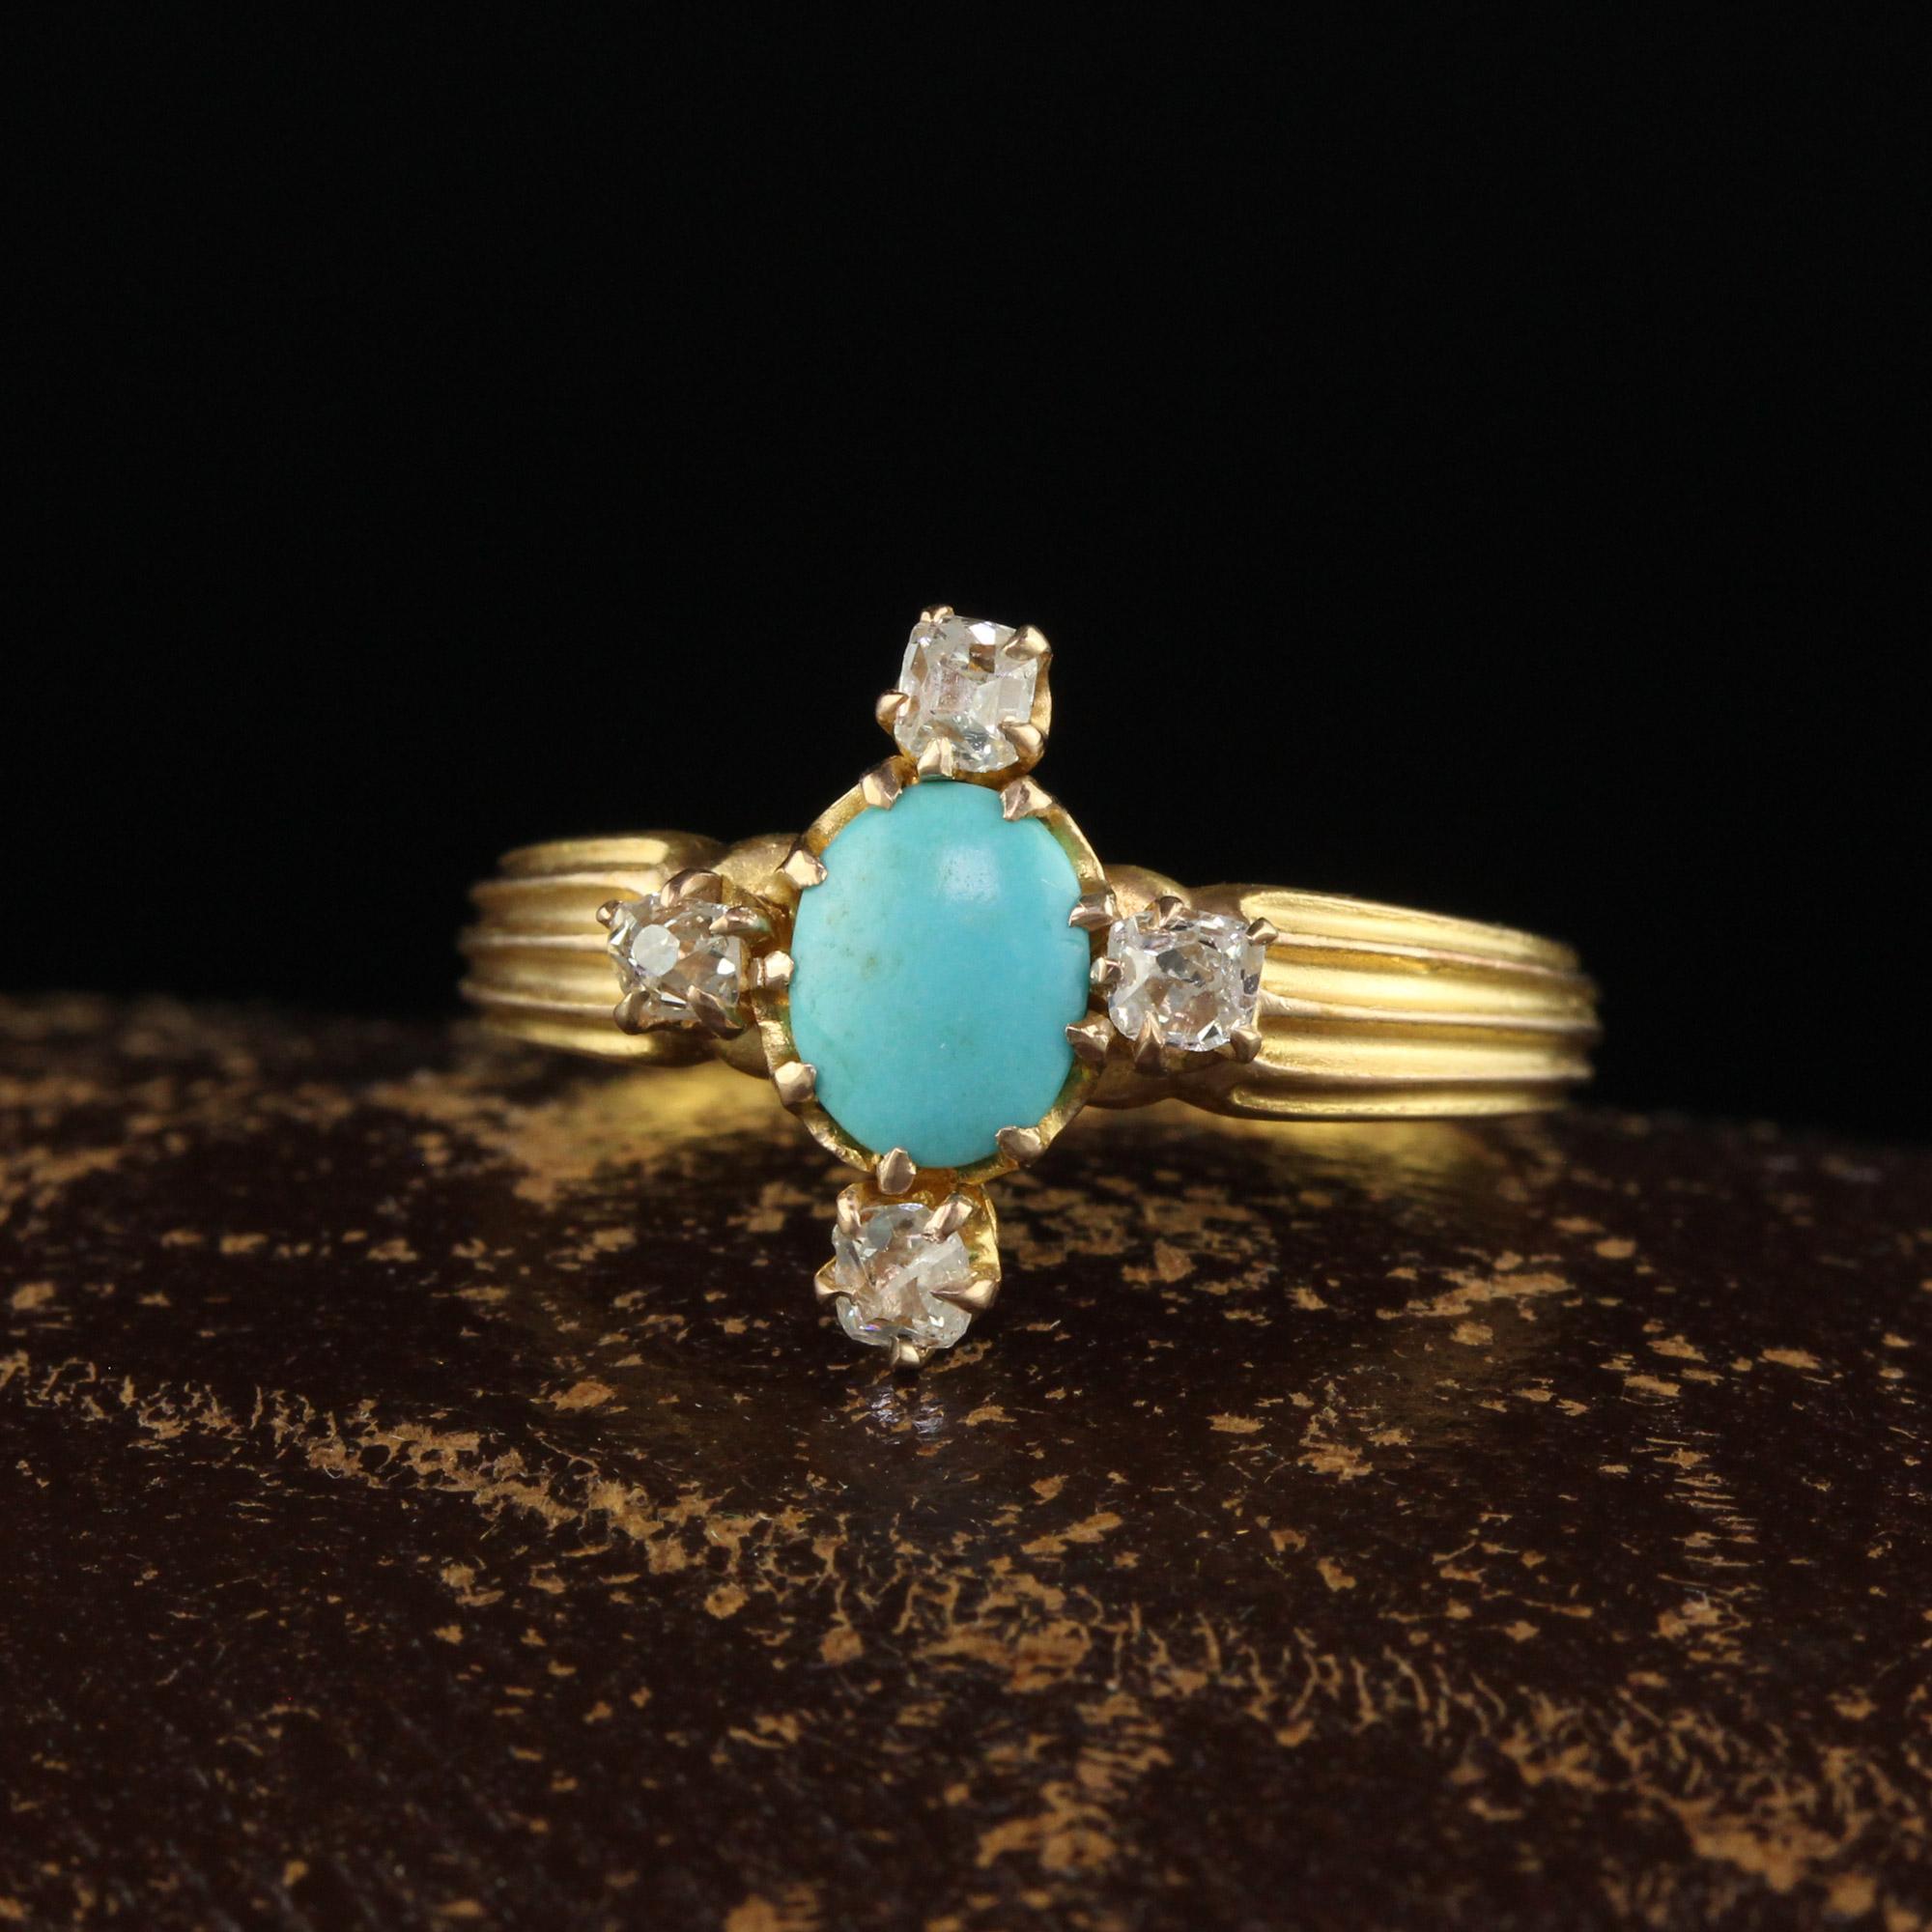 Beautiful Antique Victorian 14K Yellow Gold Turquoise and Diamond Engagement Ring. This gorgeous engagement ring is crafted in 14k yellow gold. The center holds a natural turquoise and has 4 old peruzzi cut diamonds that have very high crowns and